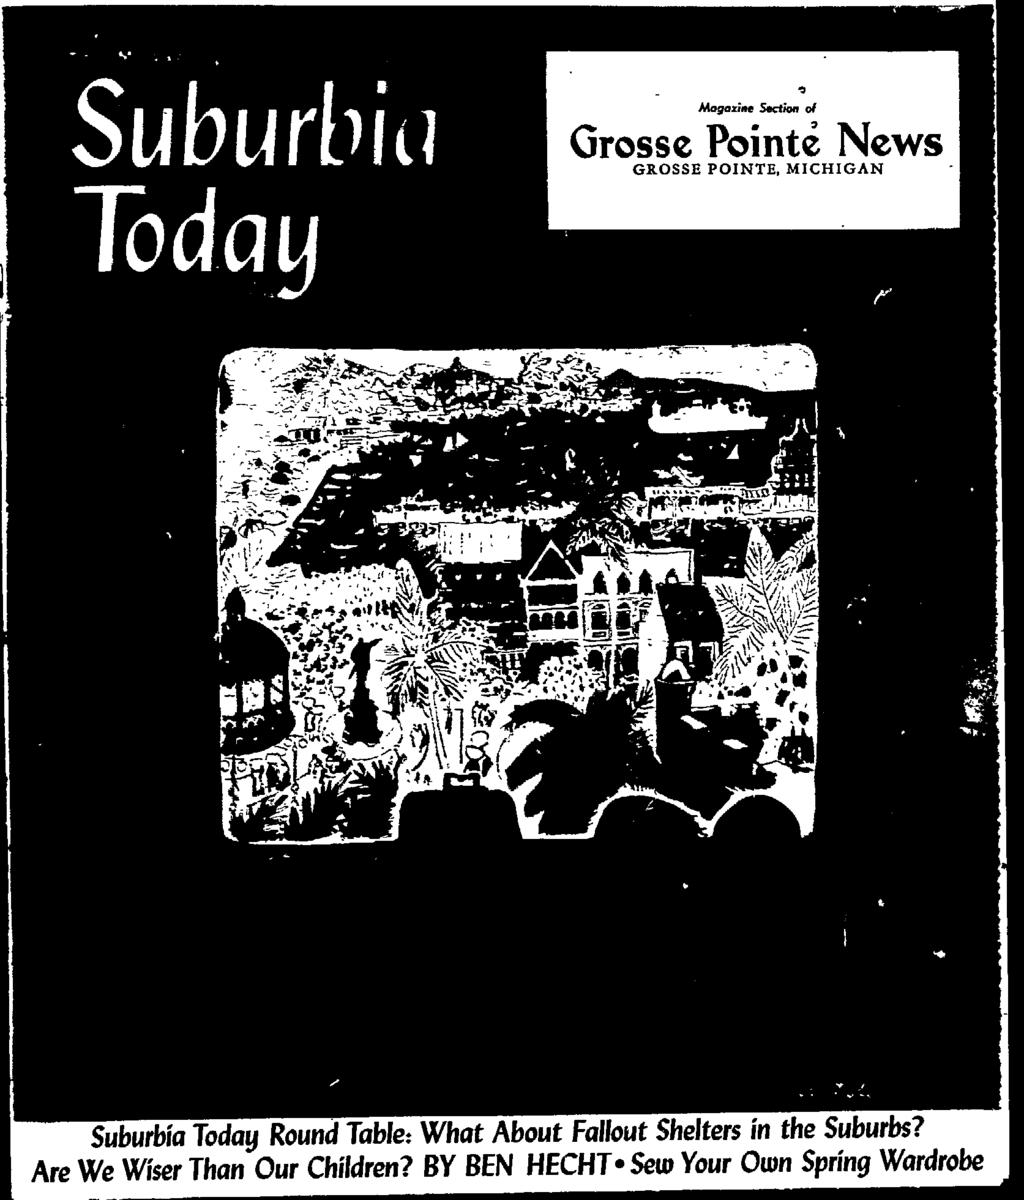 Suburbia Today Round Table: What About Fallout Shelters in the Suburbs?